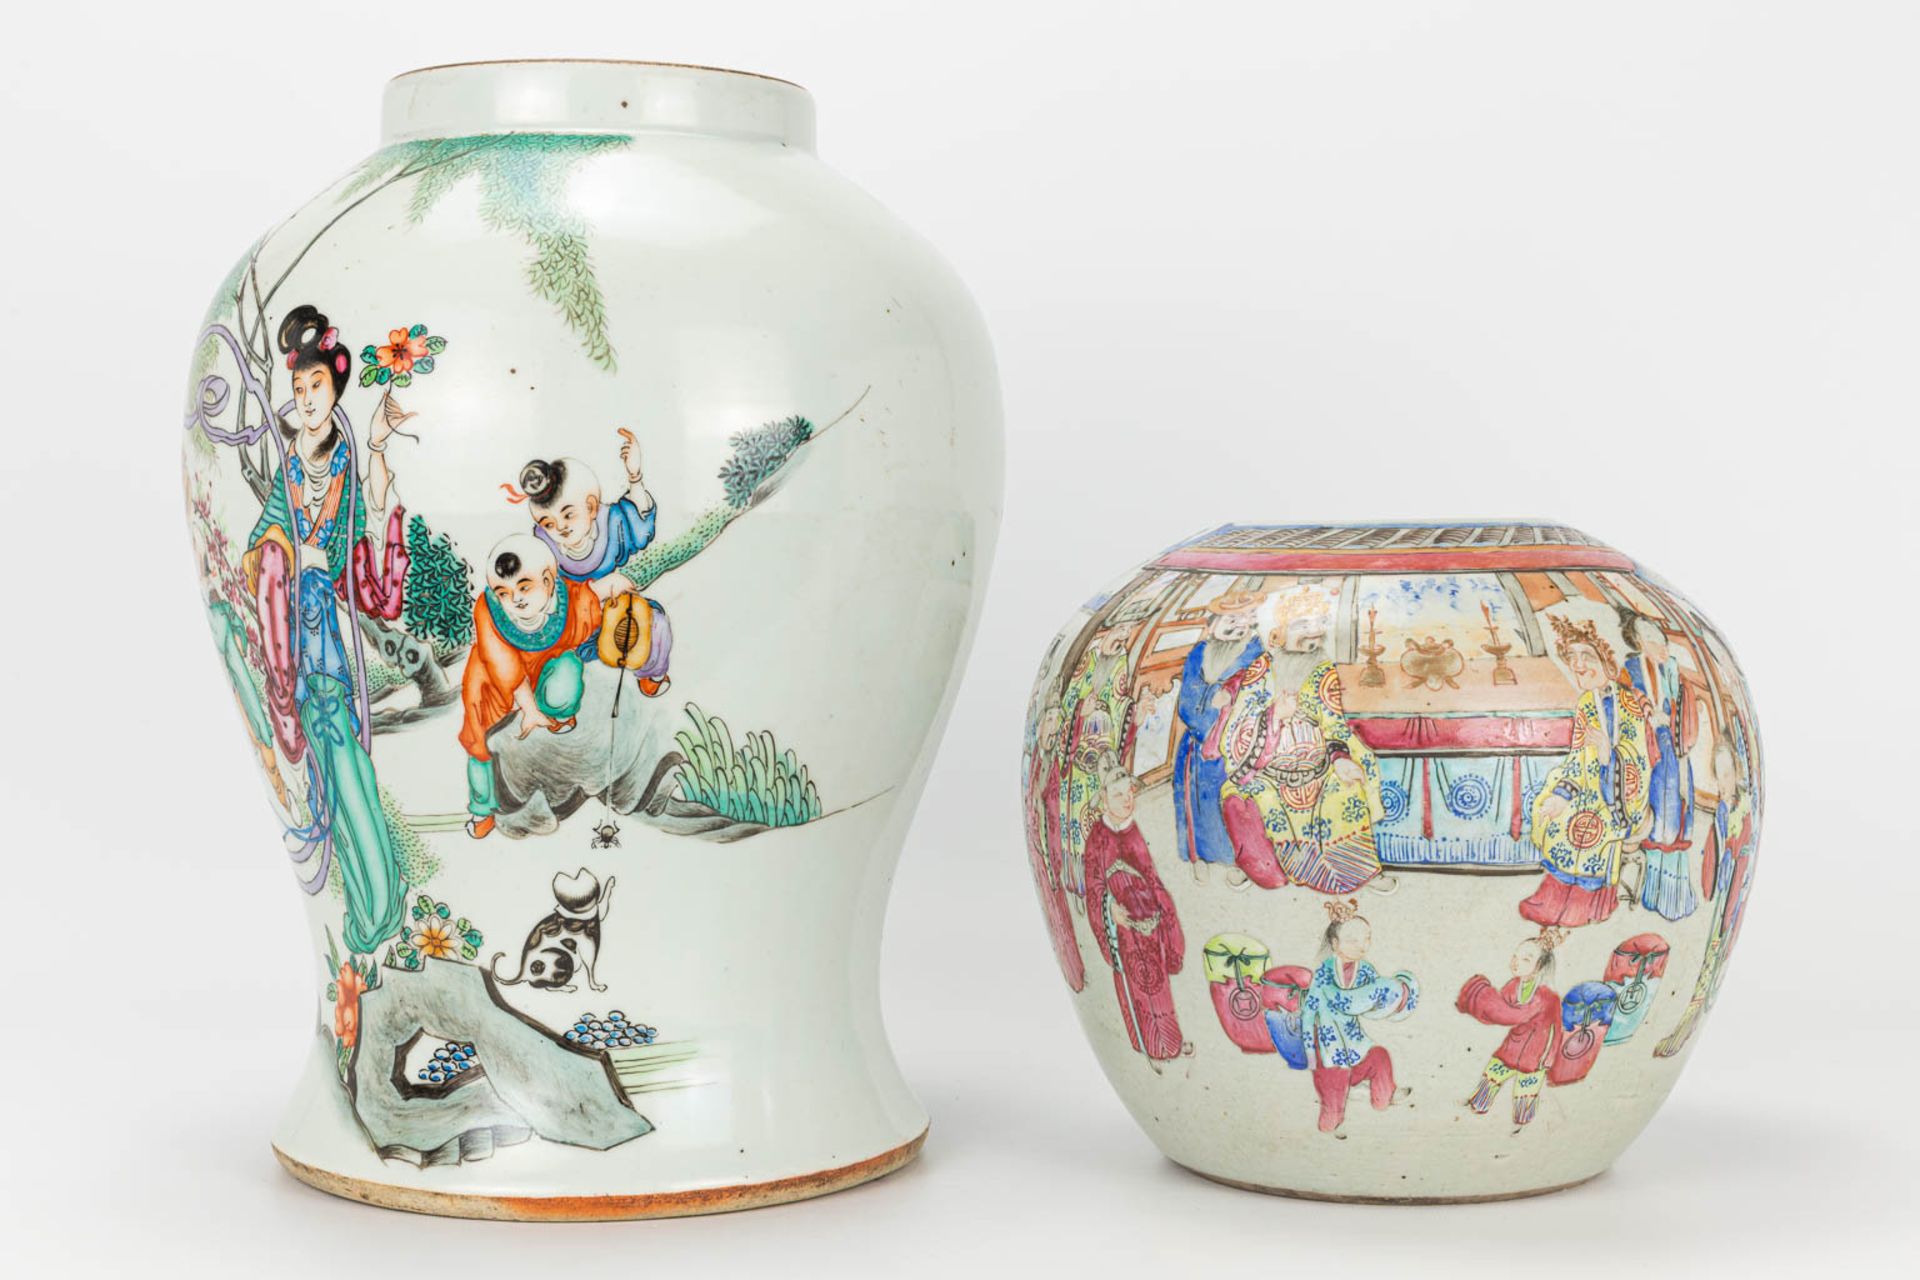 A set of 4 items made of Chinese porcelain. 2 small bowls and 2 ginger jars without lids. - Image 12 of 23